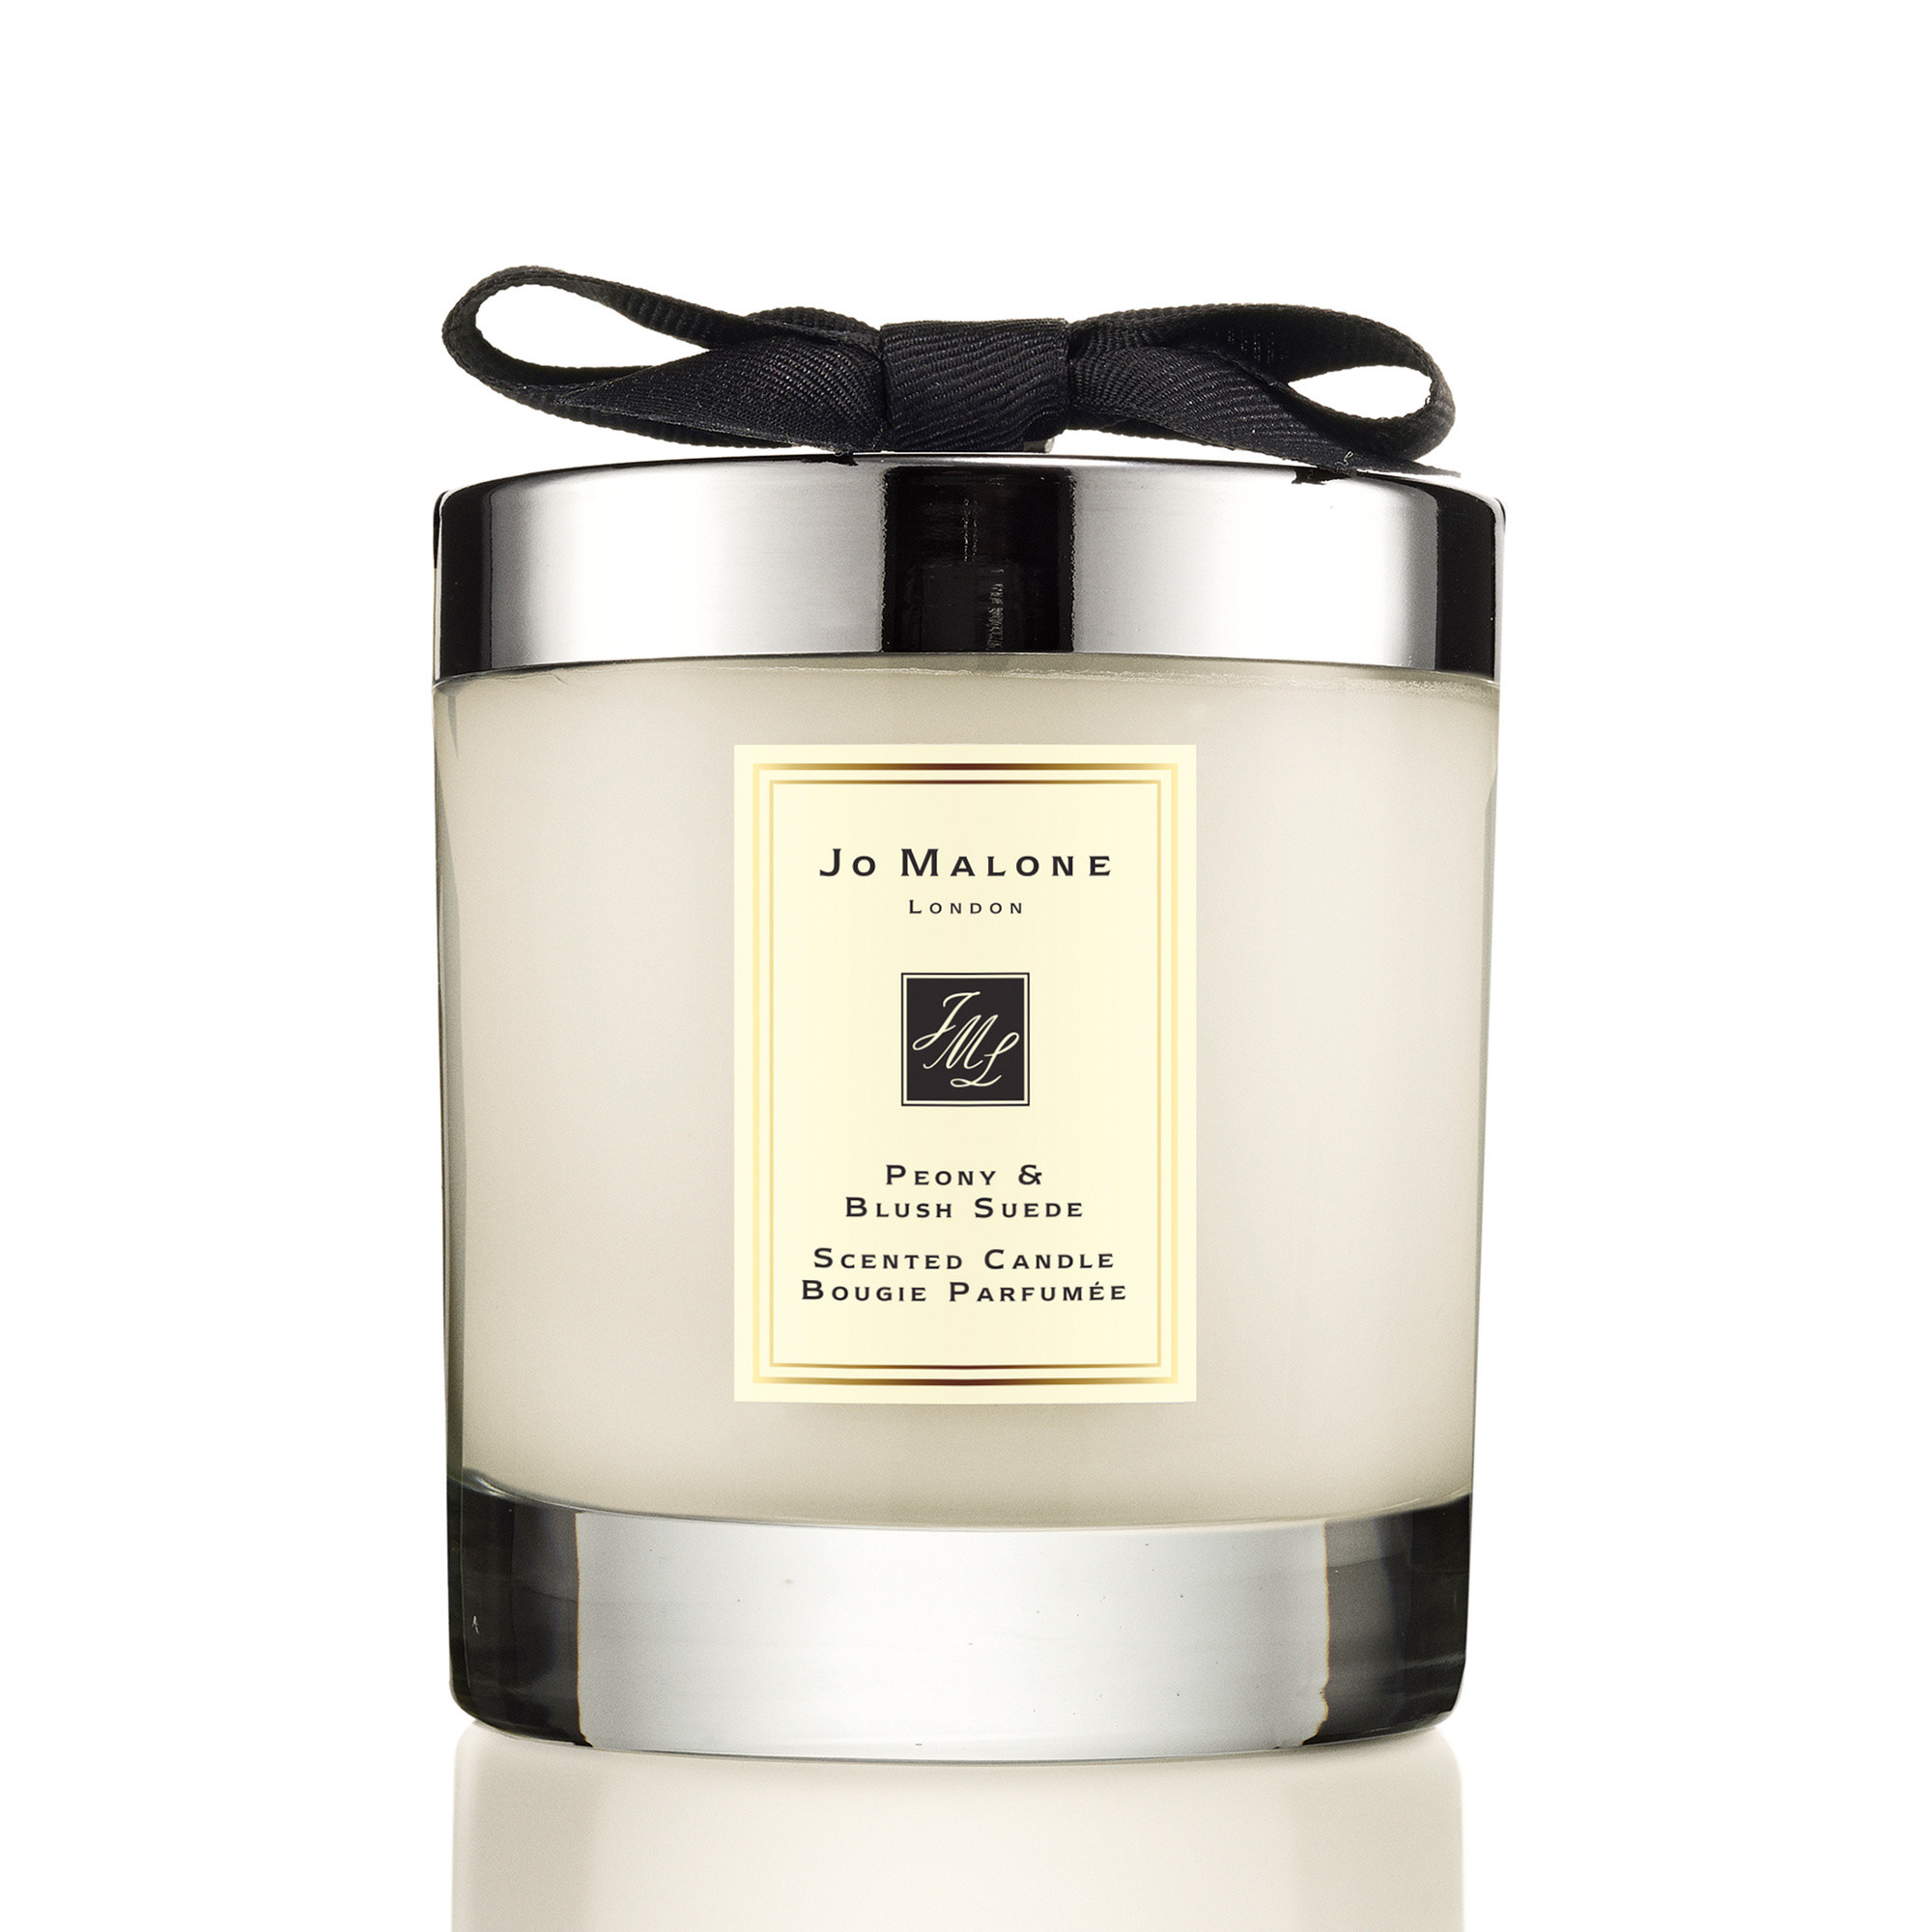 Jo Malone London peony & blush suede home candle 200 g